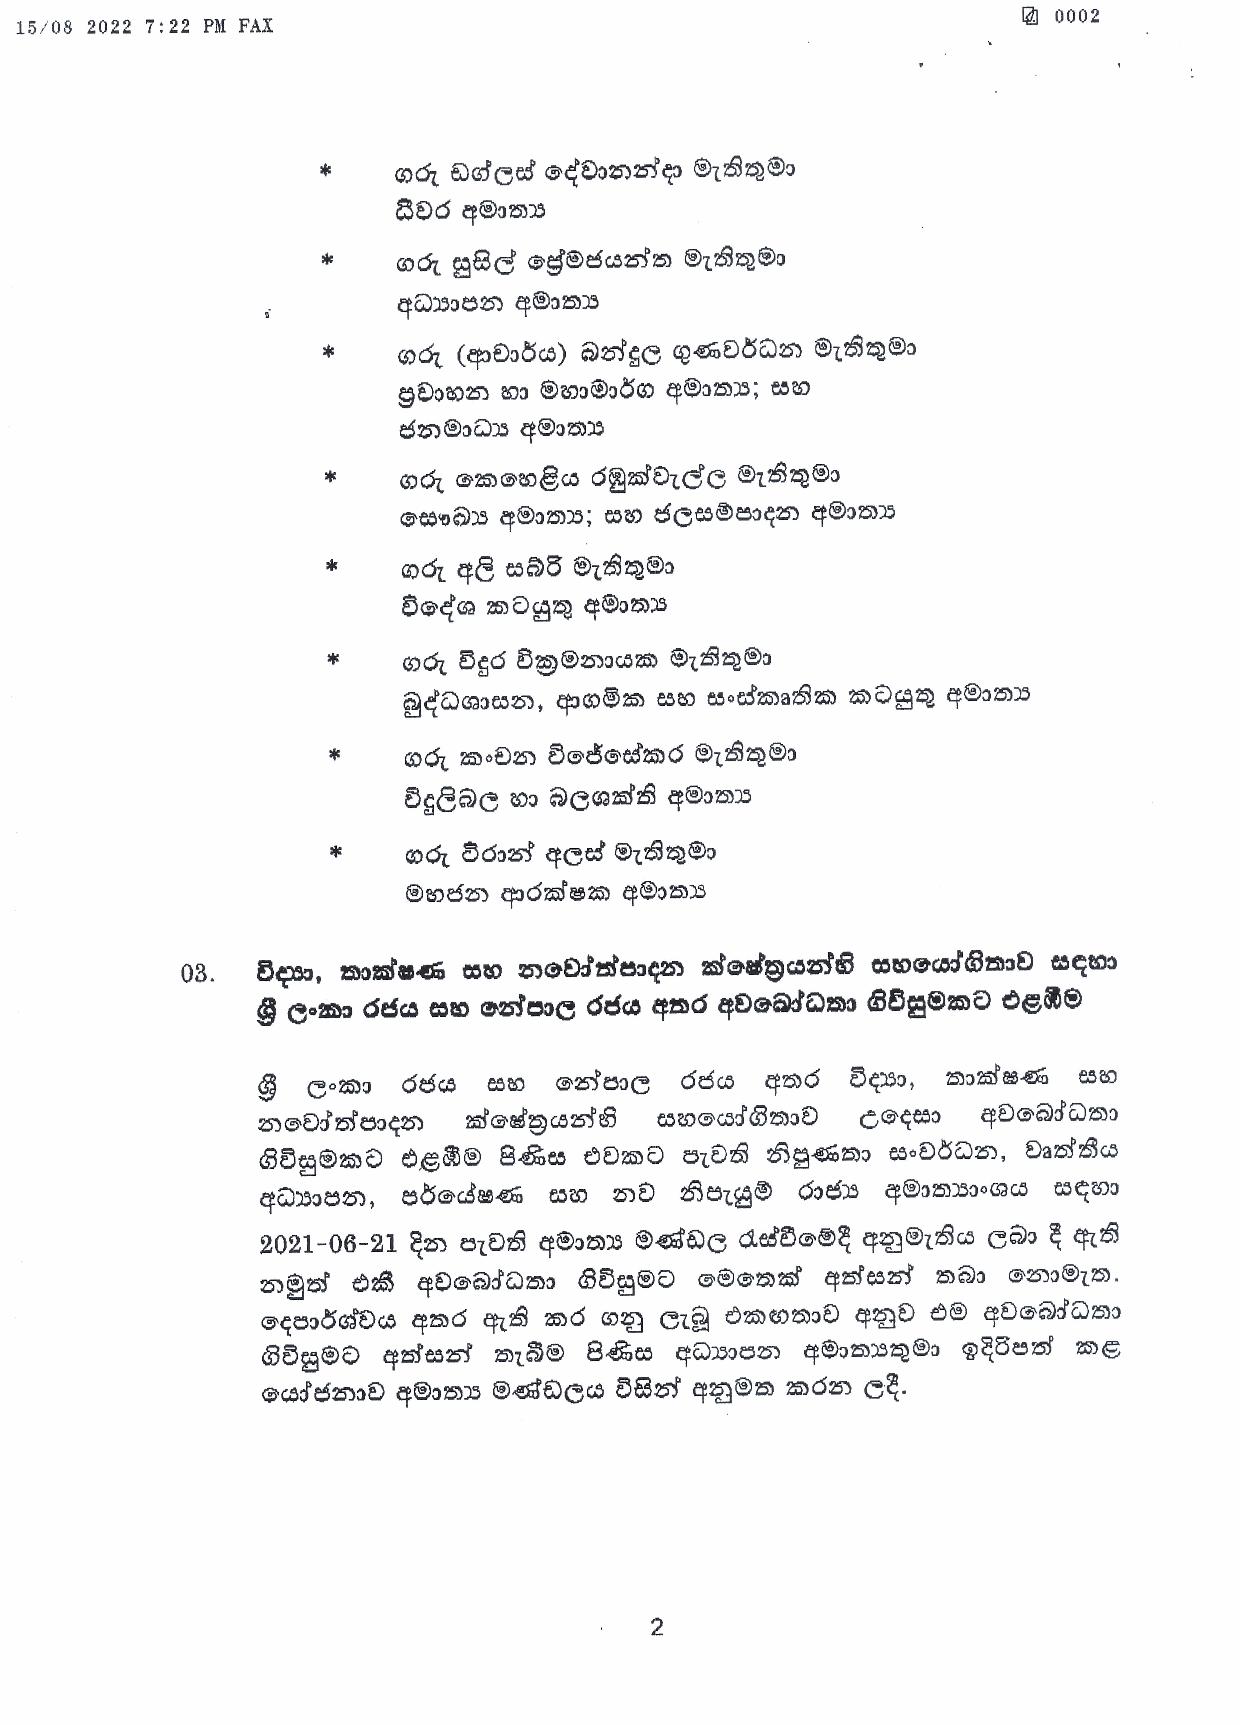 Cabinet Decision on 15.08.2022 page 002